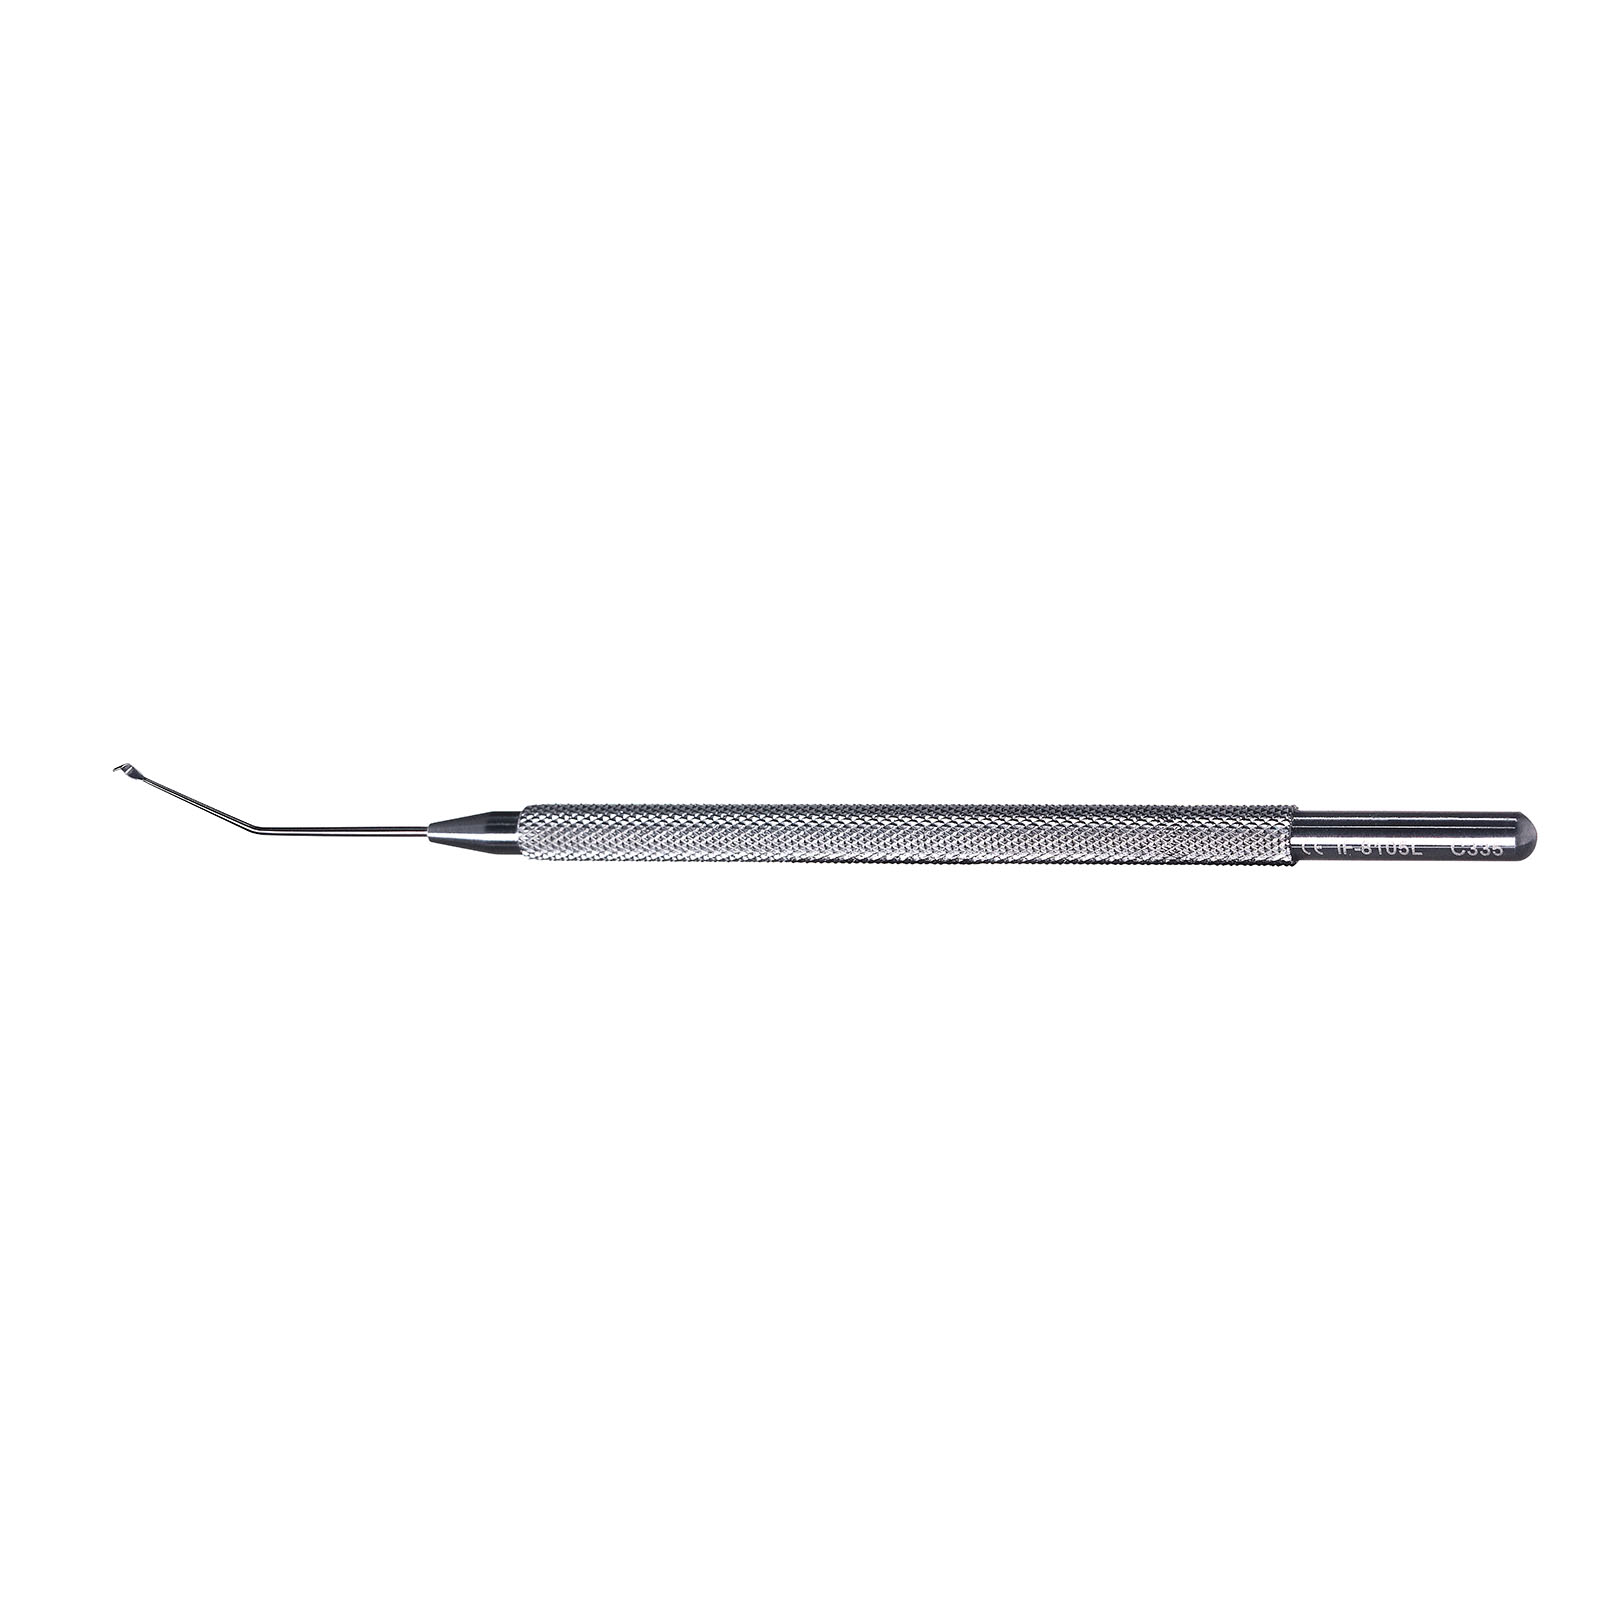 IF-8105 Stainless Steel Separator for Angle of Anterior Chamber